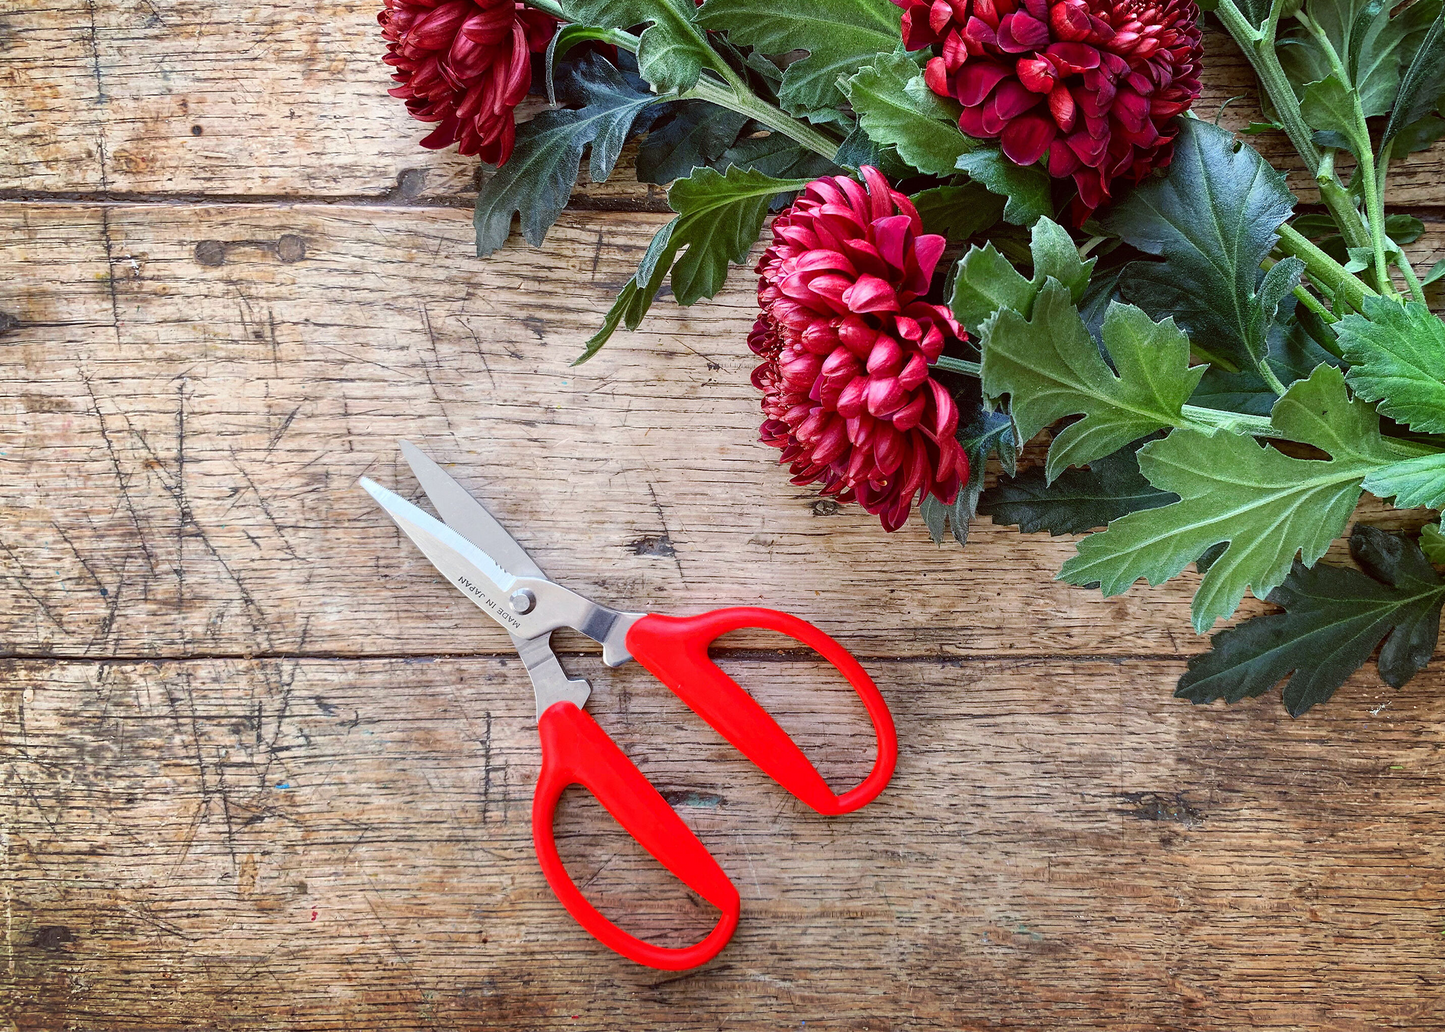 
                  
                    Niwaki Utility Scissors with red handles resting on a wooden surface next to purple flowers
                  
                